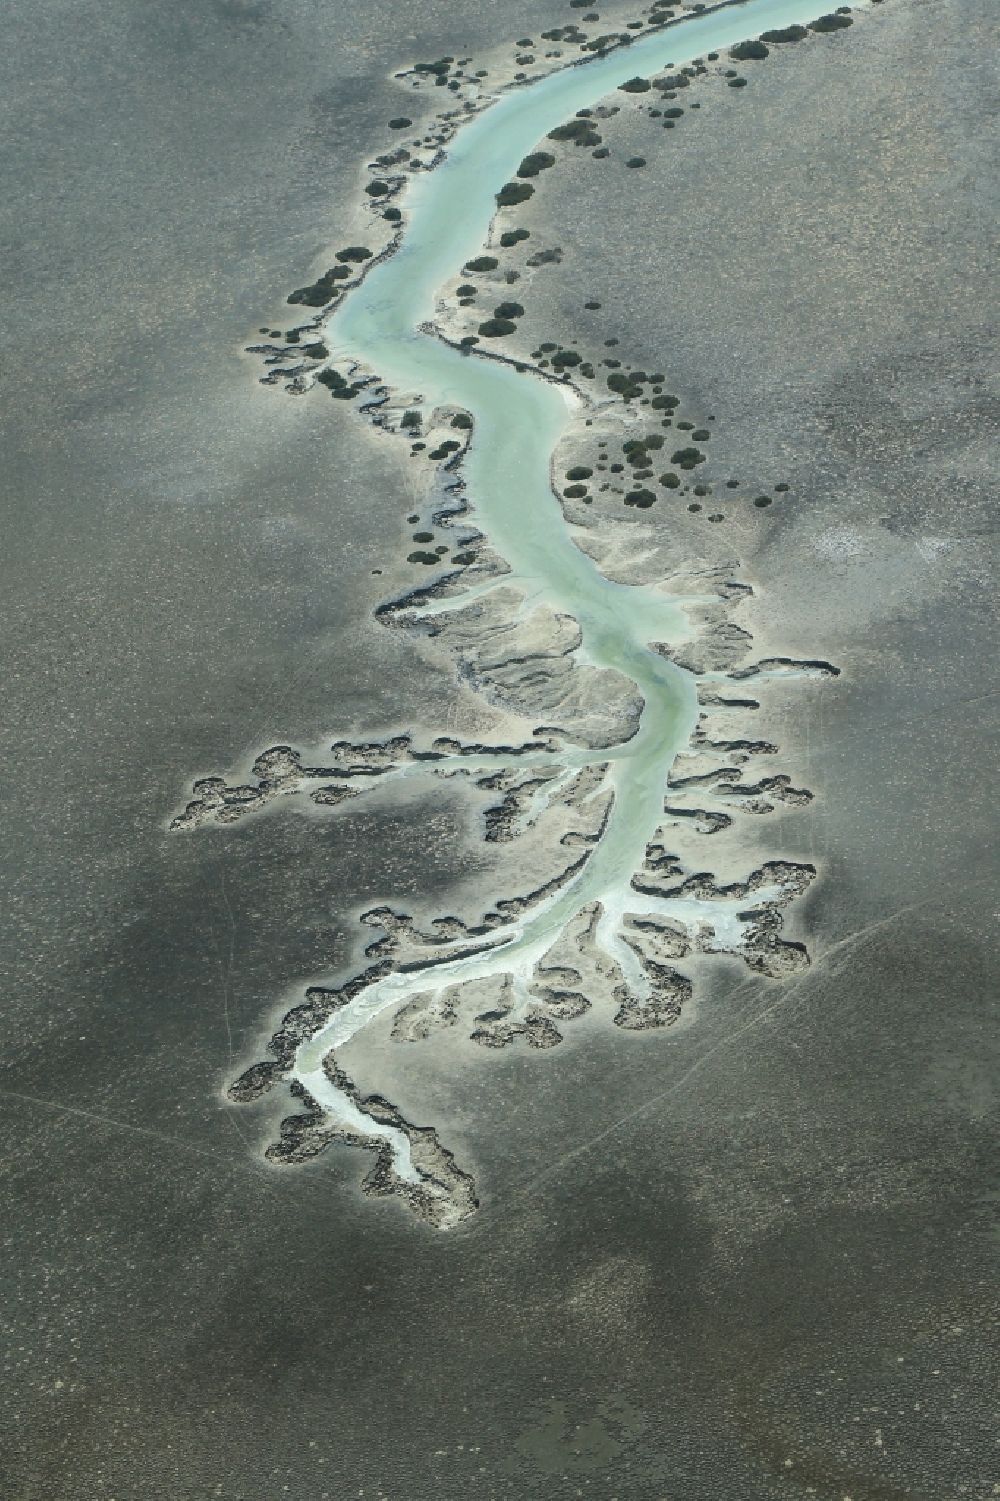 Abu Dhabi from the bird's eye view: Water structures in the mangrove waters at Khor Laffan on the Al Jubail Island in Abu Dhabi in United Arab Emirates